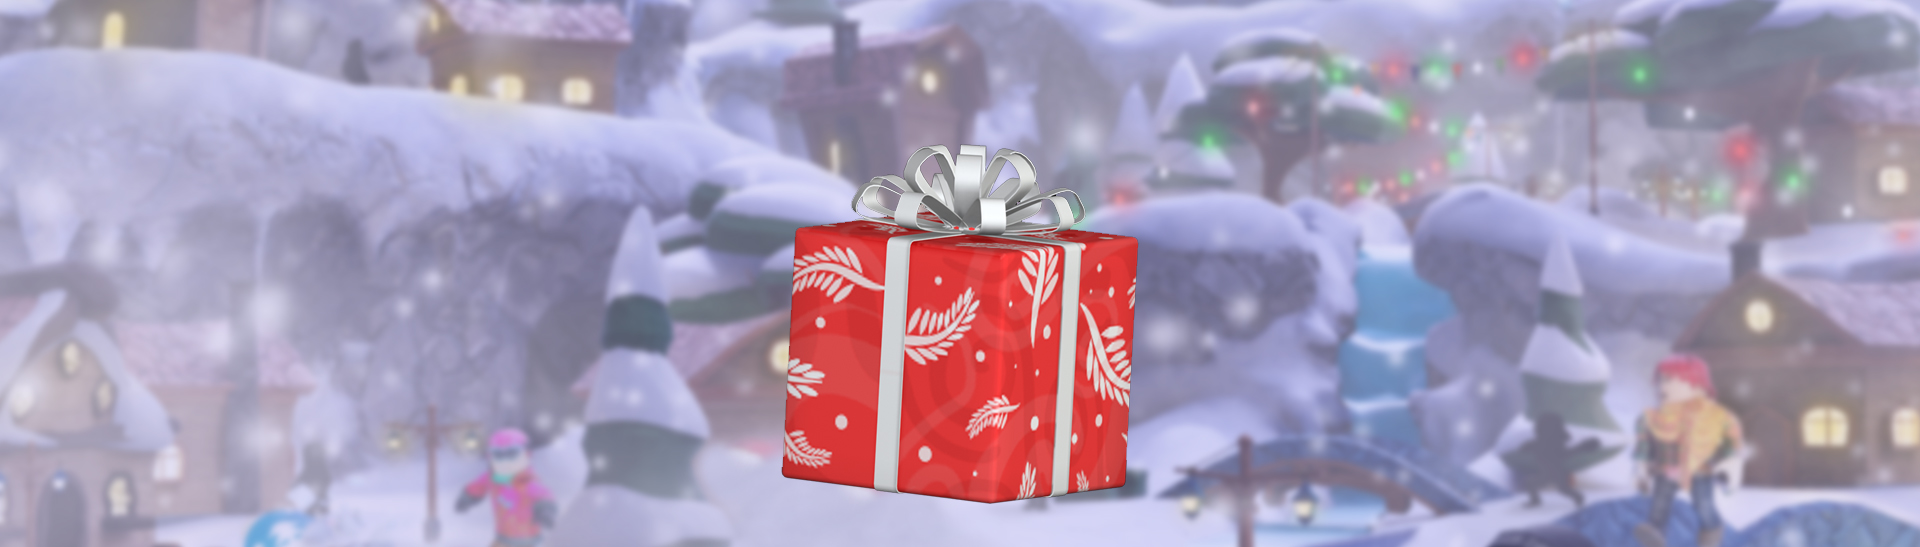 Holiday Giveaway 2017 Roblox Blog - gift of wisdom roblox